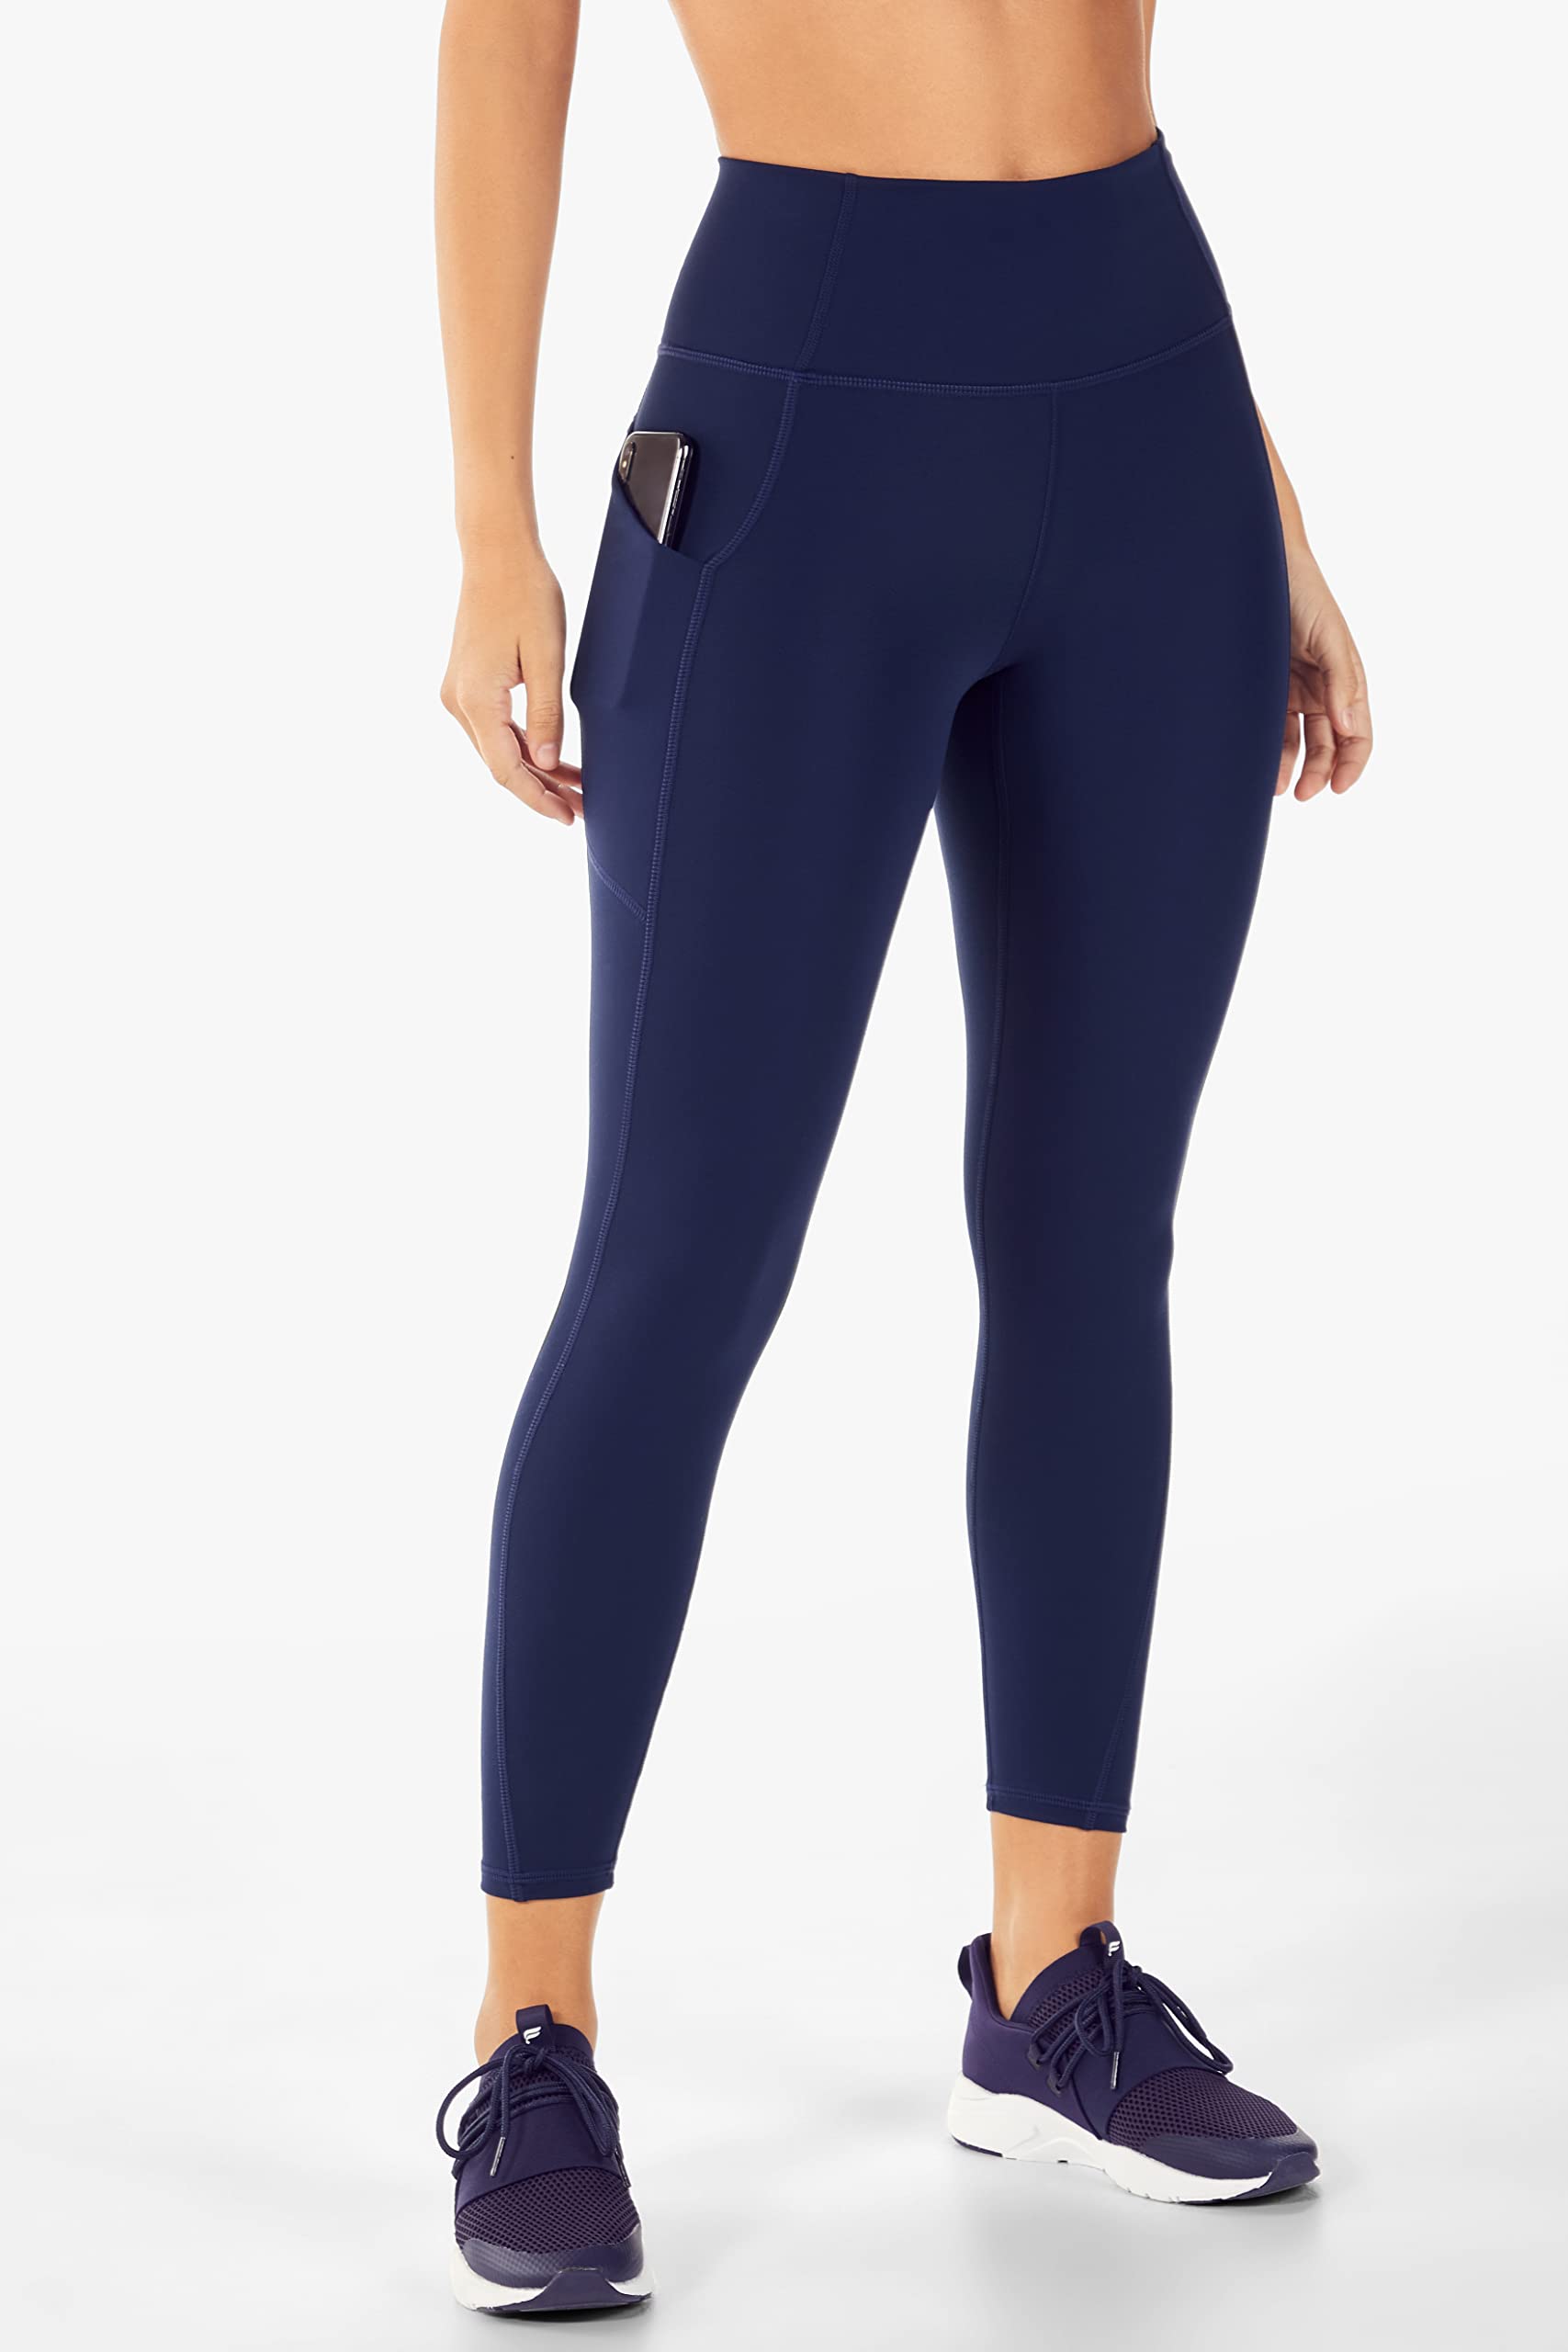 Buy Fabletics Women's Oasis PureLuxe High-Waisted Legging, Workout